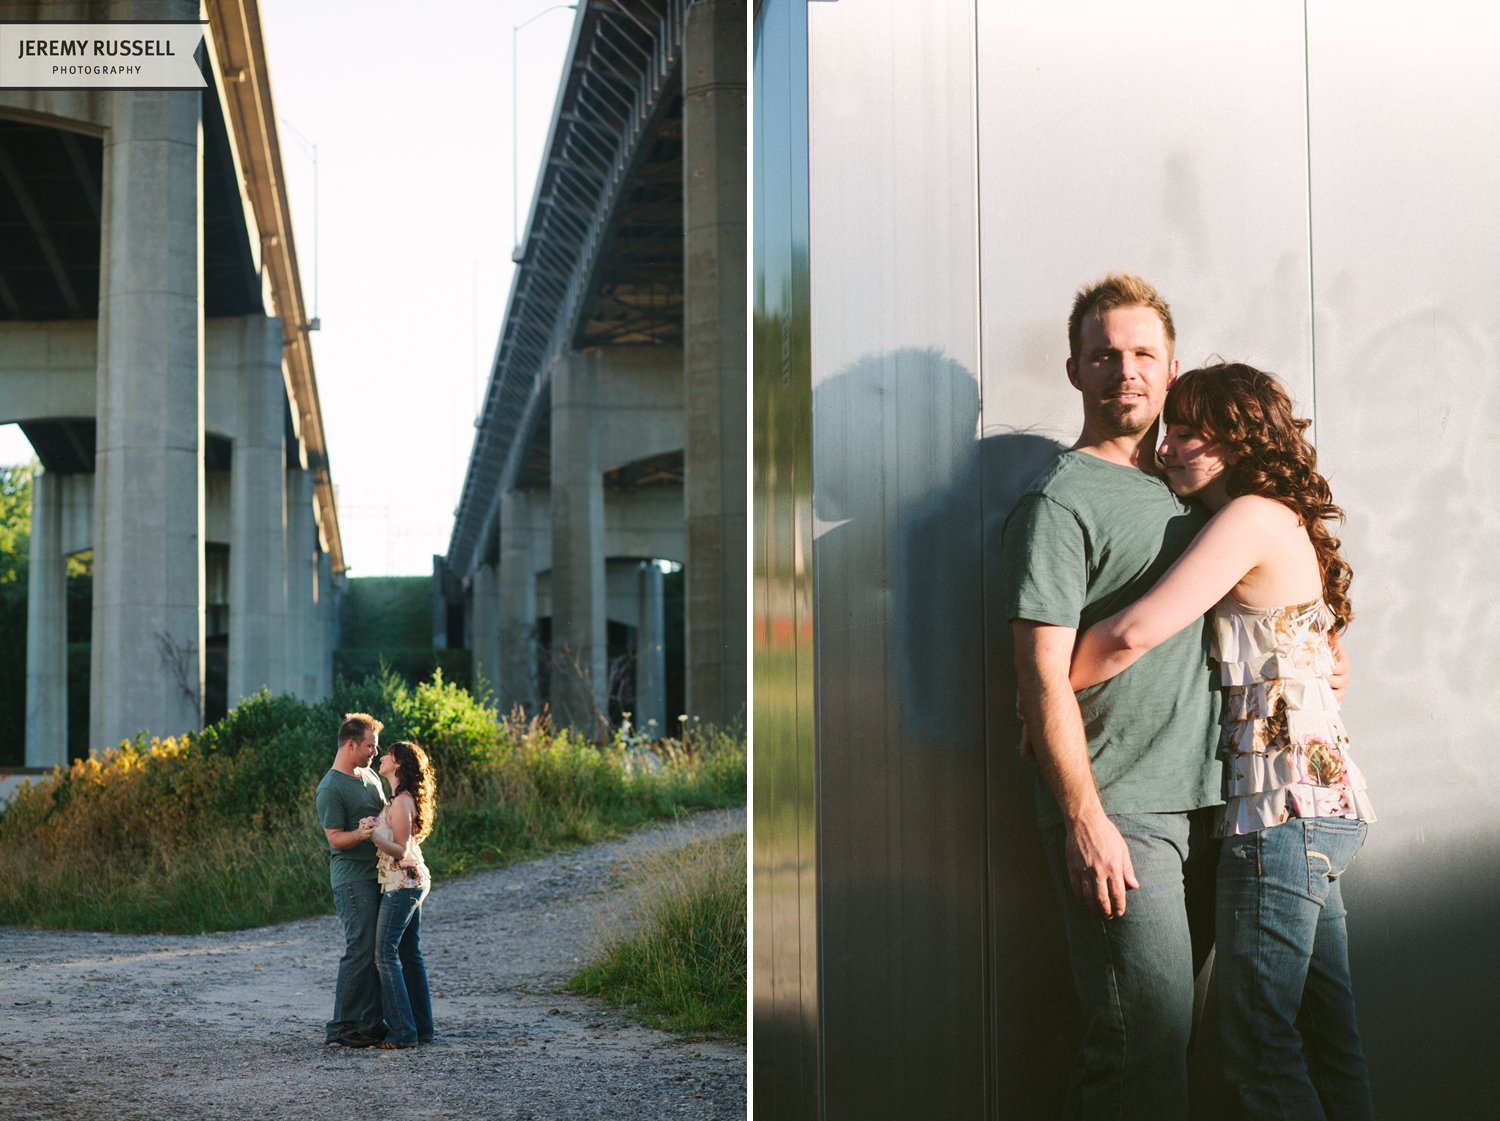 Jeremy-Russell-1206-Asheville-Engagements-05.jpg